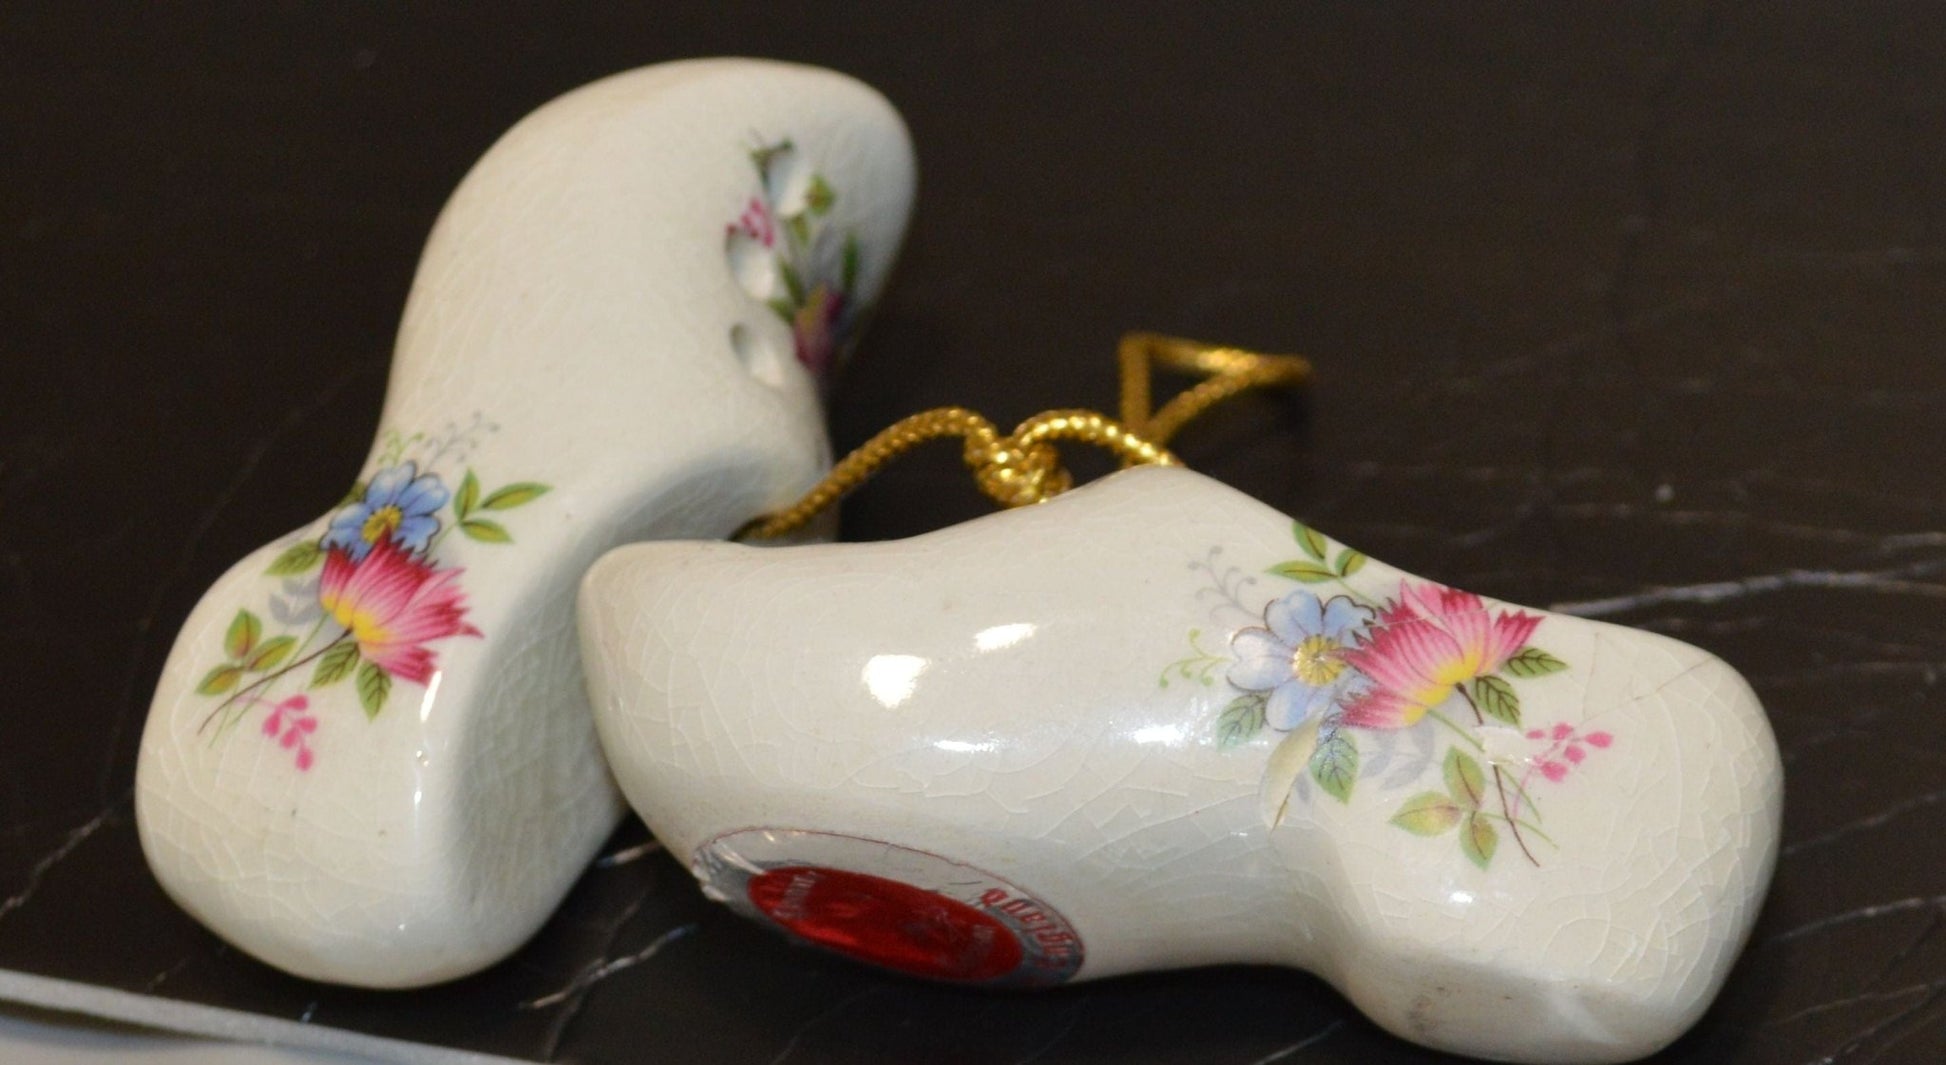 ORNAMENTAL BOOTS WITH A FLORAL DESIGN SEVEN SINGLE BOOTS AND ONE PAIR OF CLOGS(PREVIOUSLY OWNED) GOOD CONDITION - TMD167207